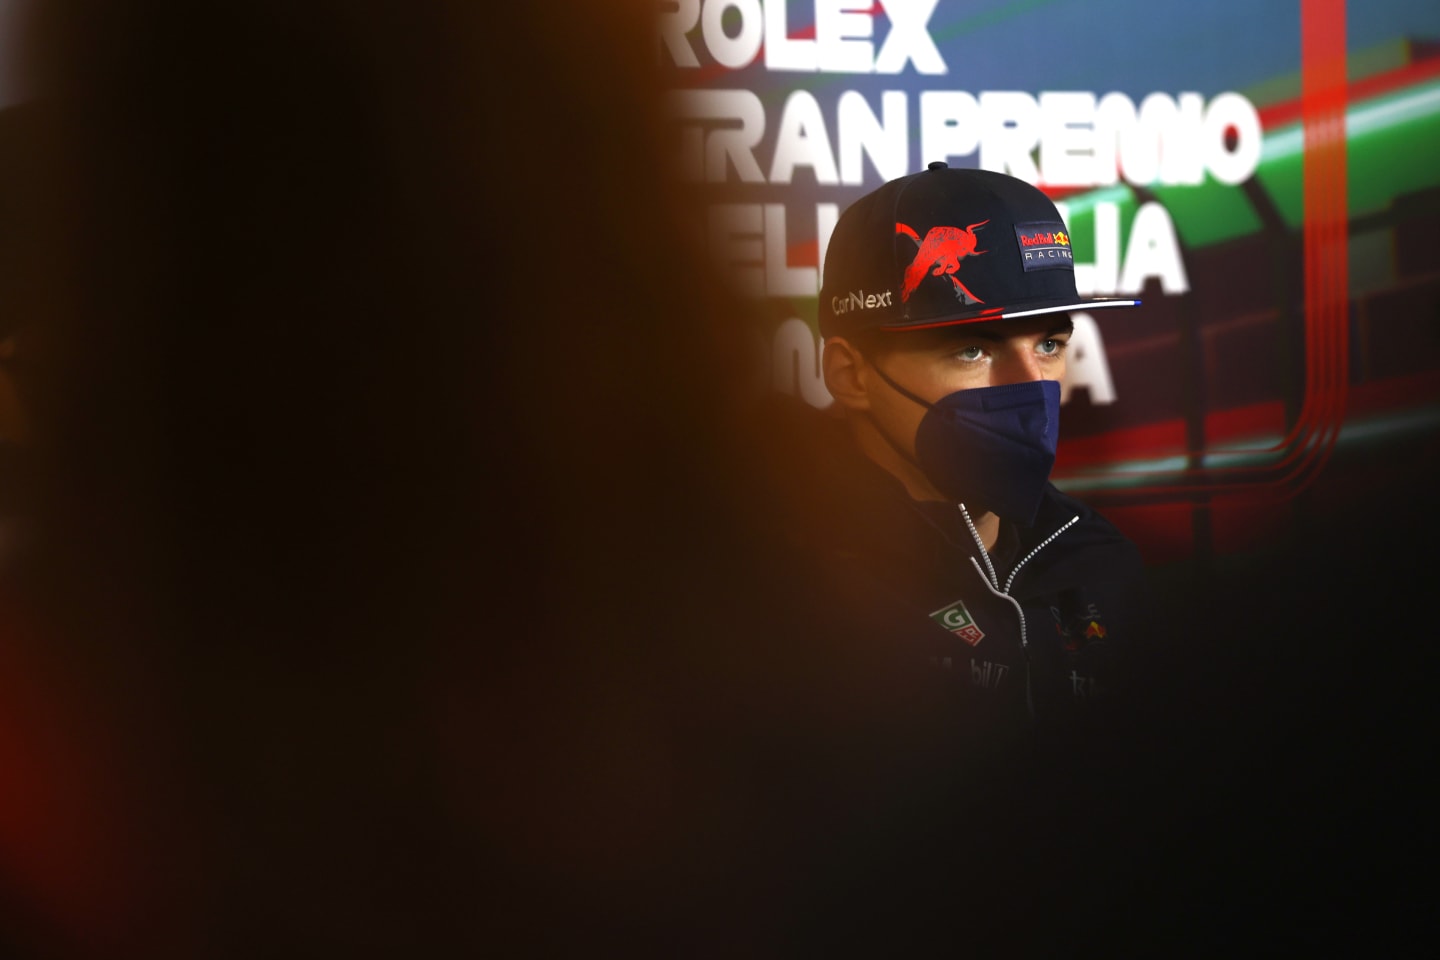 IMOLA, ITALY - APRIL 22: Max Verstappen of the Netherlands and Oracle Red Bull Racing talks in the Drivers Press Conference prior to practice ahead of the F1 Grand Prix of Emilia Romagna at Autodromo Enzo e Dino Ferrari on April 22, 2022 in Imola, Italy. (Photo by Lars Baron/Getty Images)